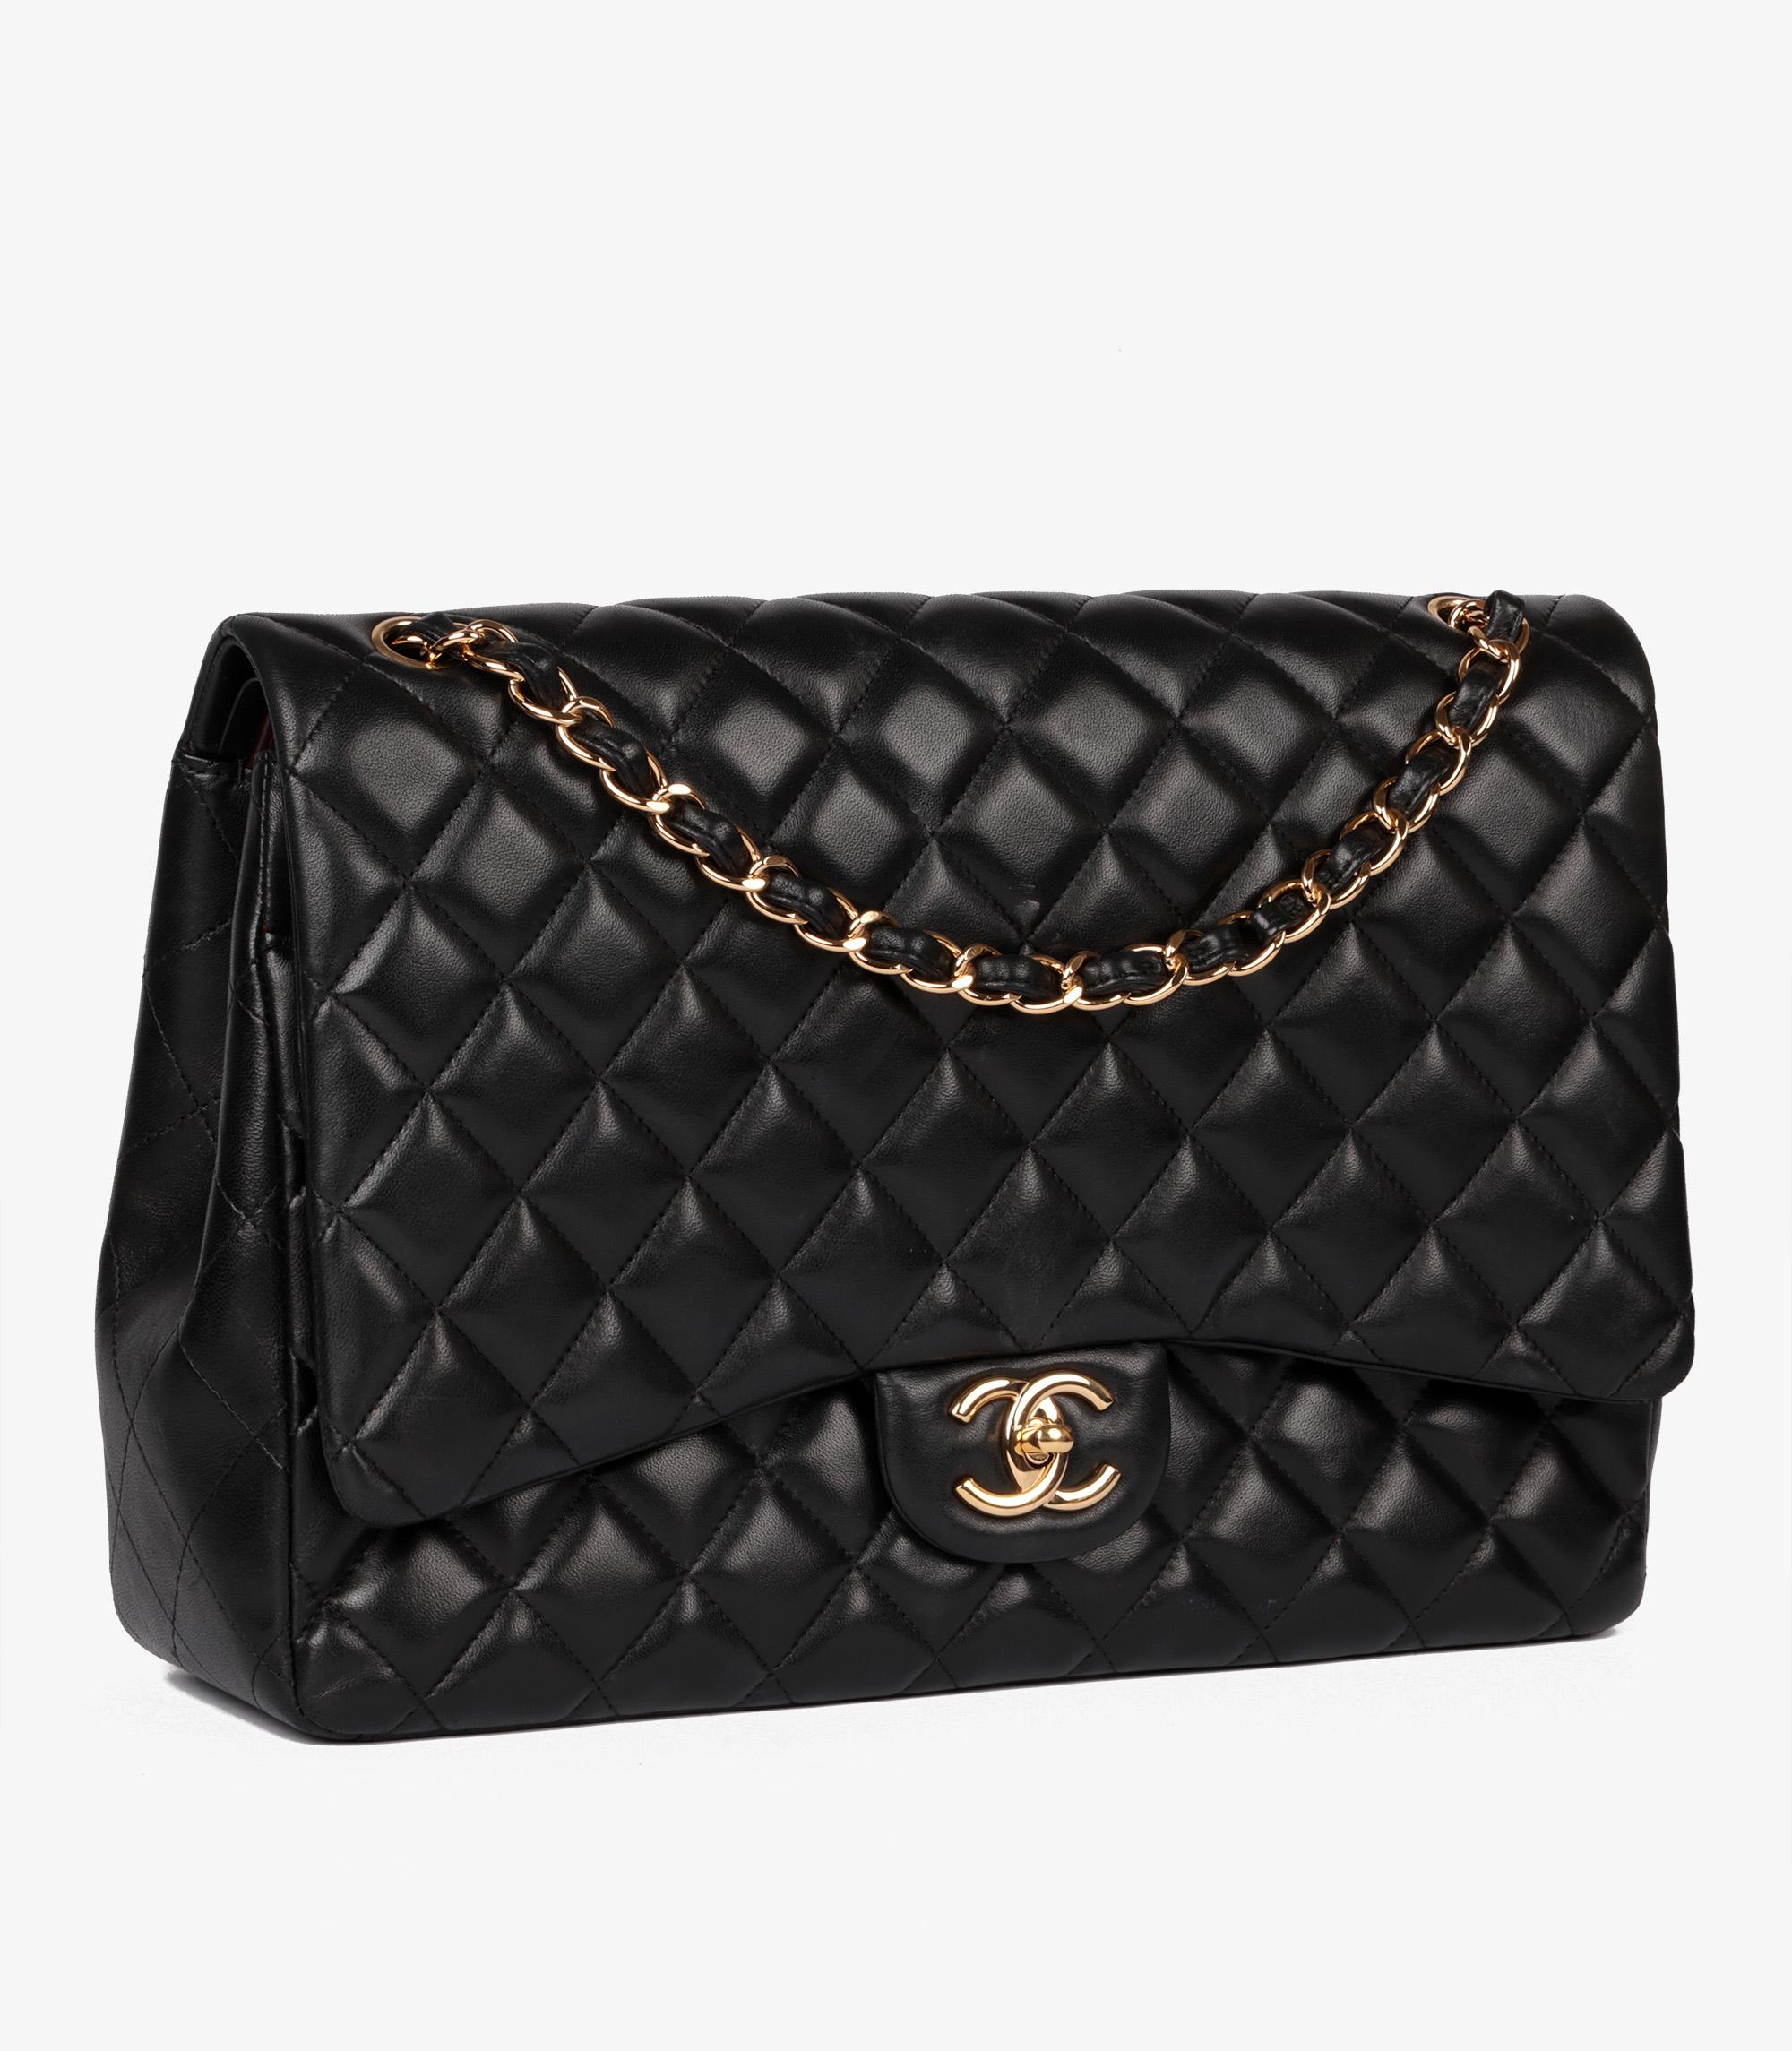 Chanel Black Quilted Lambskin Maxi Classic Double Flap Bag

Brand- Chanel
Model- Maxi Classic Double Flap Bag
Product Type- Crossbody, Shoulder
Serial Number- 15******
Age- Circa 2011
Accompanied By- Chanel Box, Dust Bag, Care Booklet
Colour-